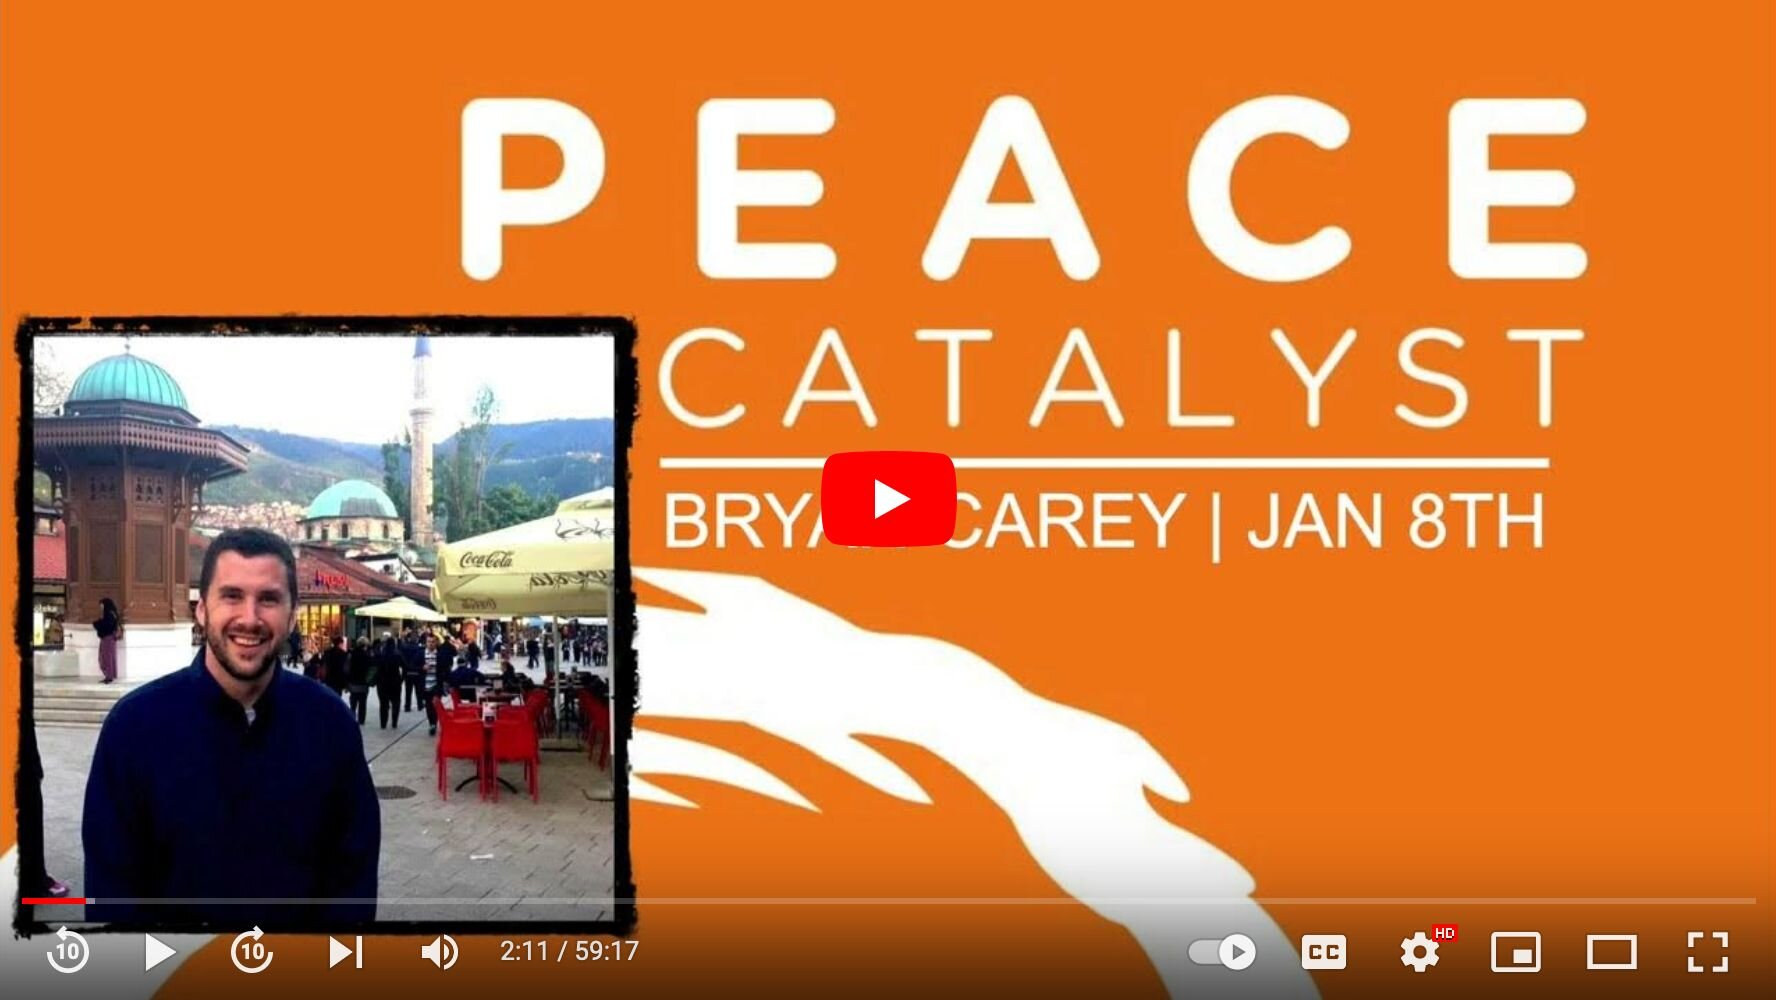 Want to hear how we talk to churches about peacebuilding? Listen to our Bosnia peacebuilder Bryan Carey's talk at the Belong Collective! 

youtube.com/watch?v=mvgoPzqRIeg&amp;t=131s (we'll put the link in our bio).

#church #christian #peacebuilding 